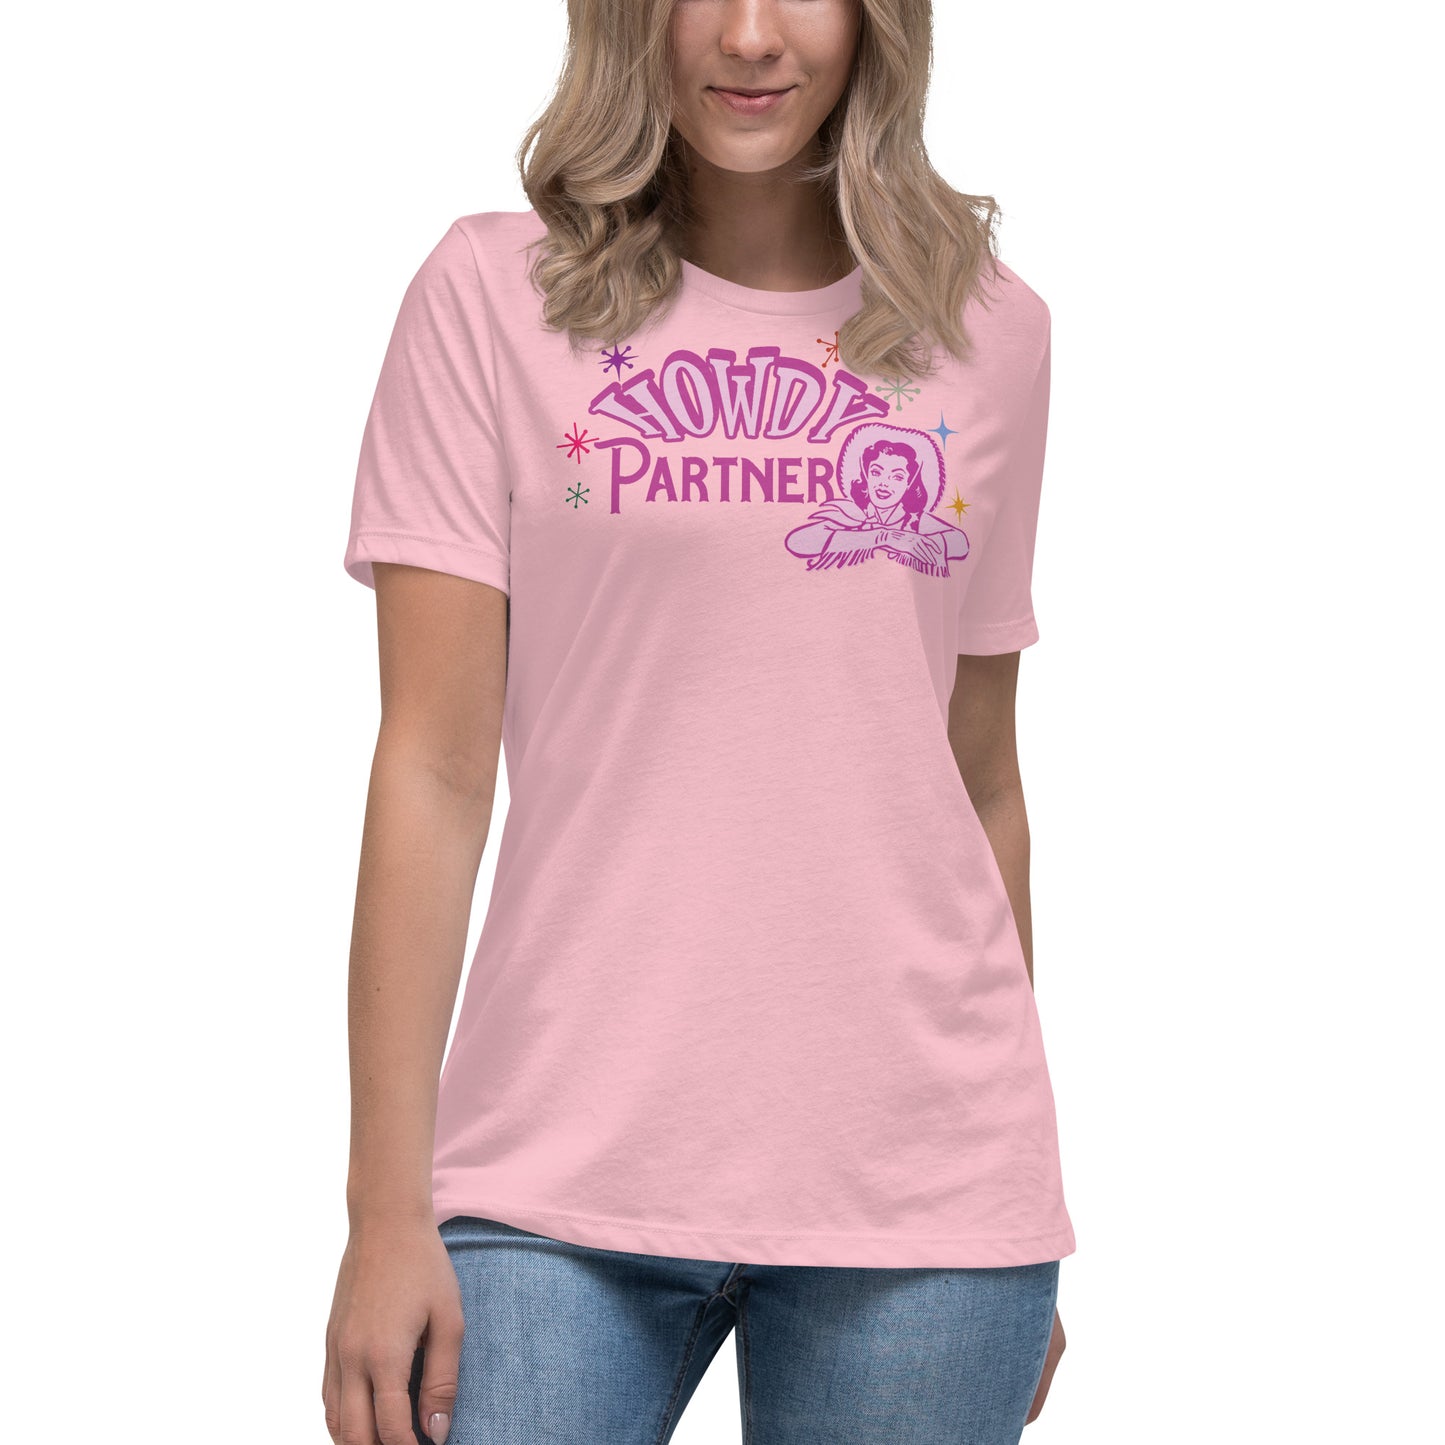 Howdy Partner Retro Cowgirl Women's Relaxed T-Shirt